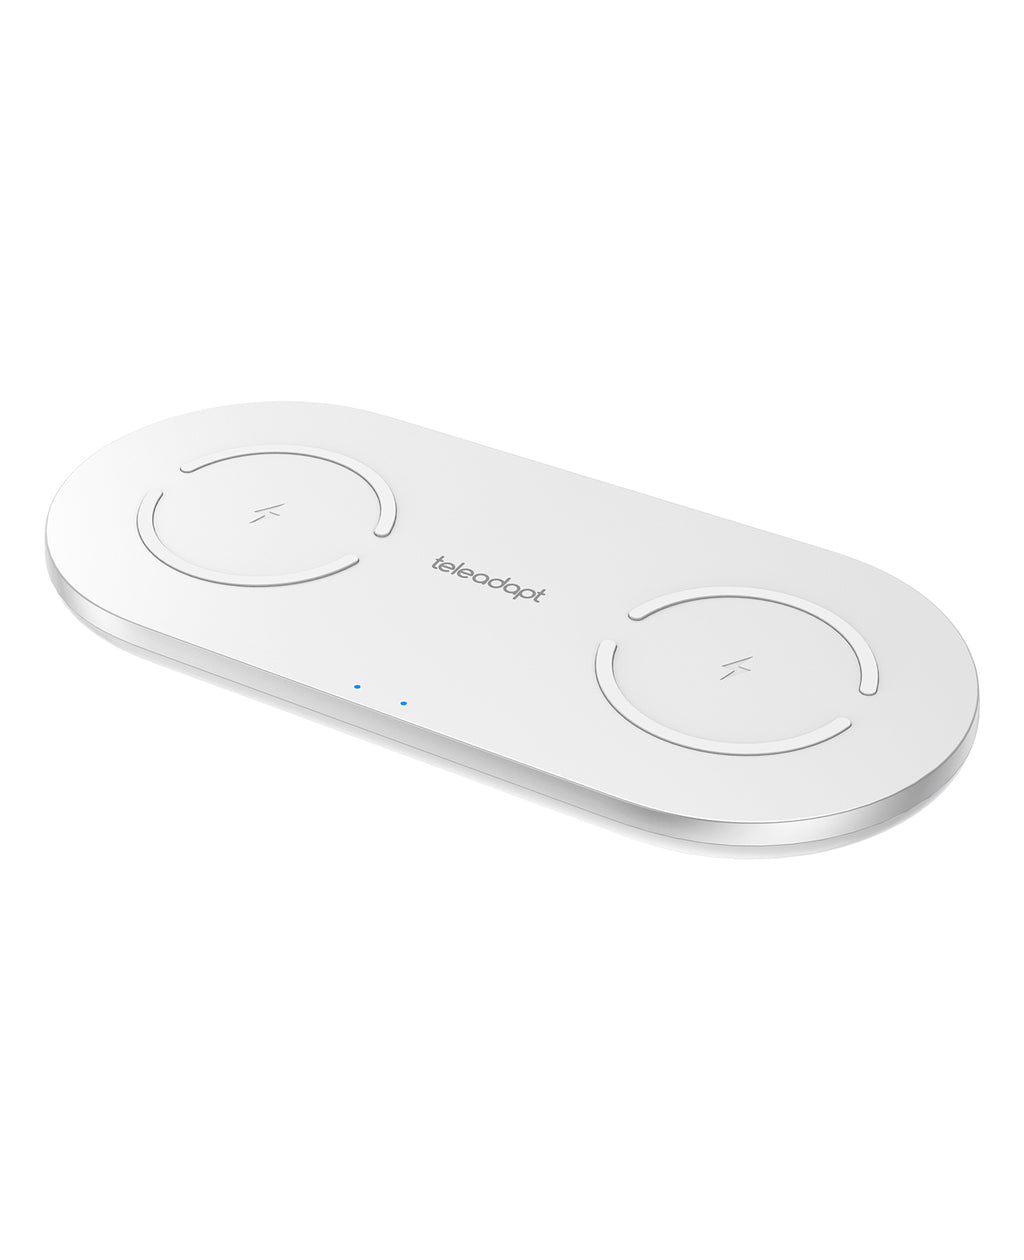 Teleadapt ChargePort Duo. 10W Qi Certified Wireless Charging Pad. Suitable for iPhone, AirPods, Galaxy, Galaxy Buds and Other Qi Devices. Attractive W